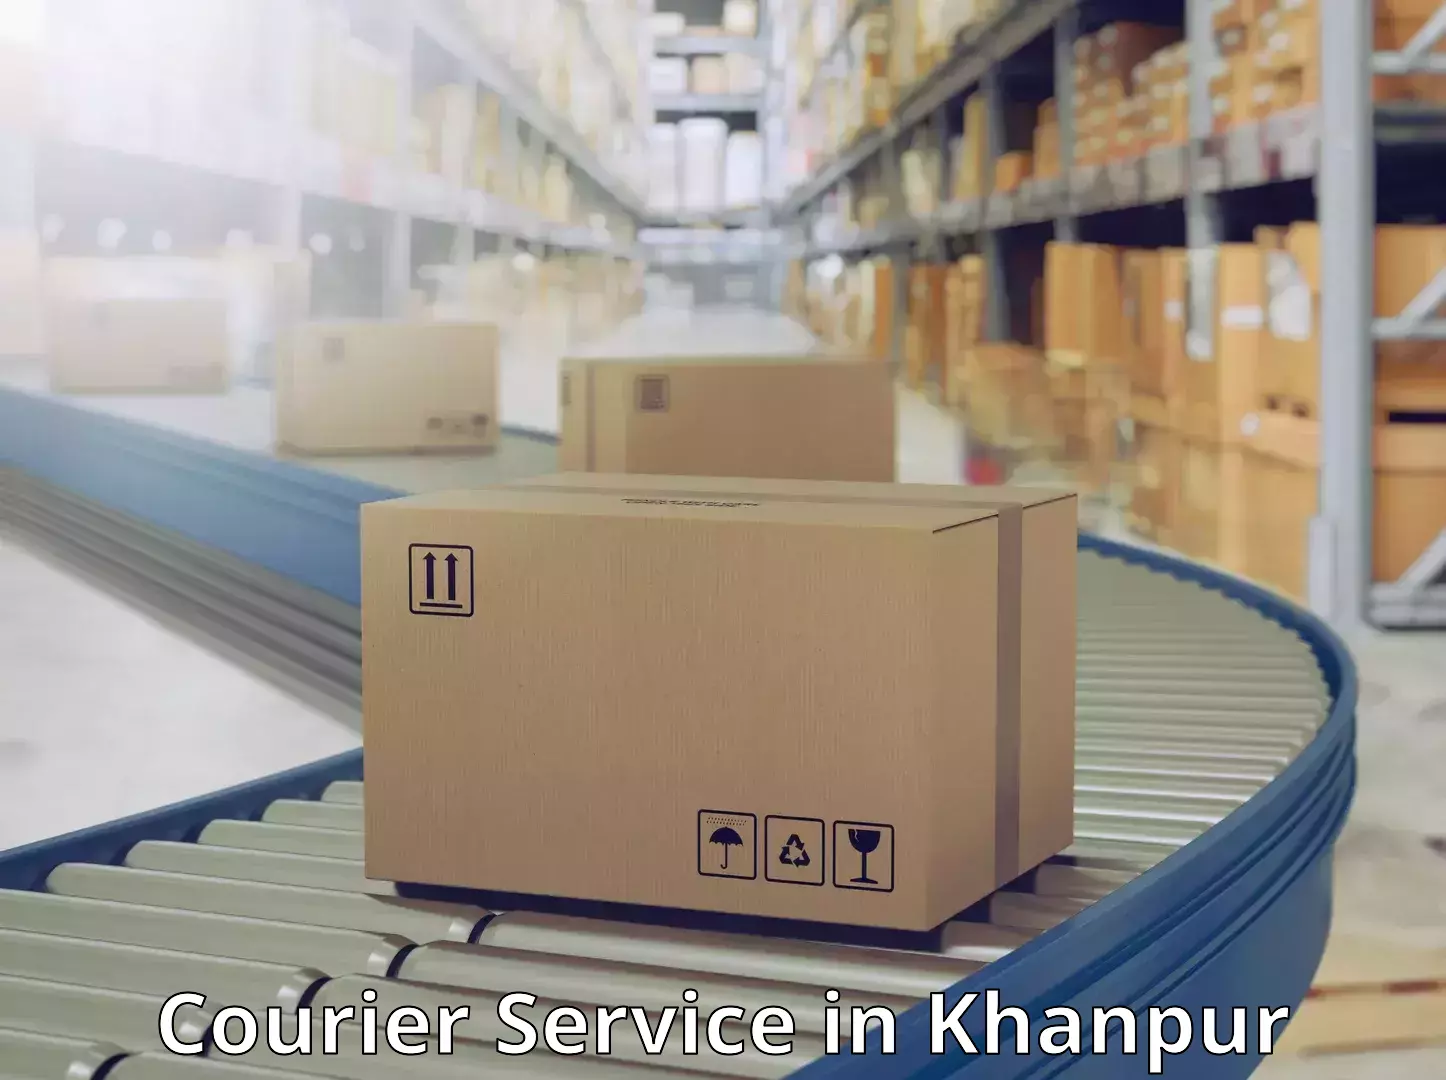 High-speed logistics services in Khanpur